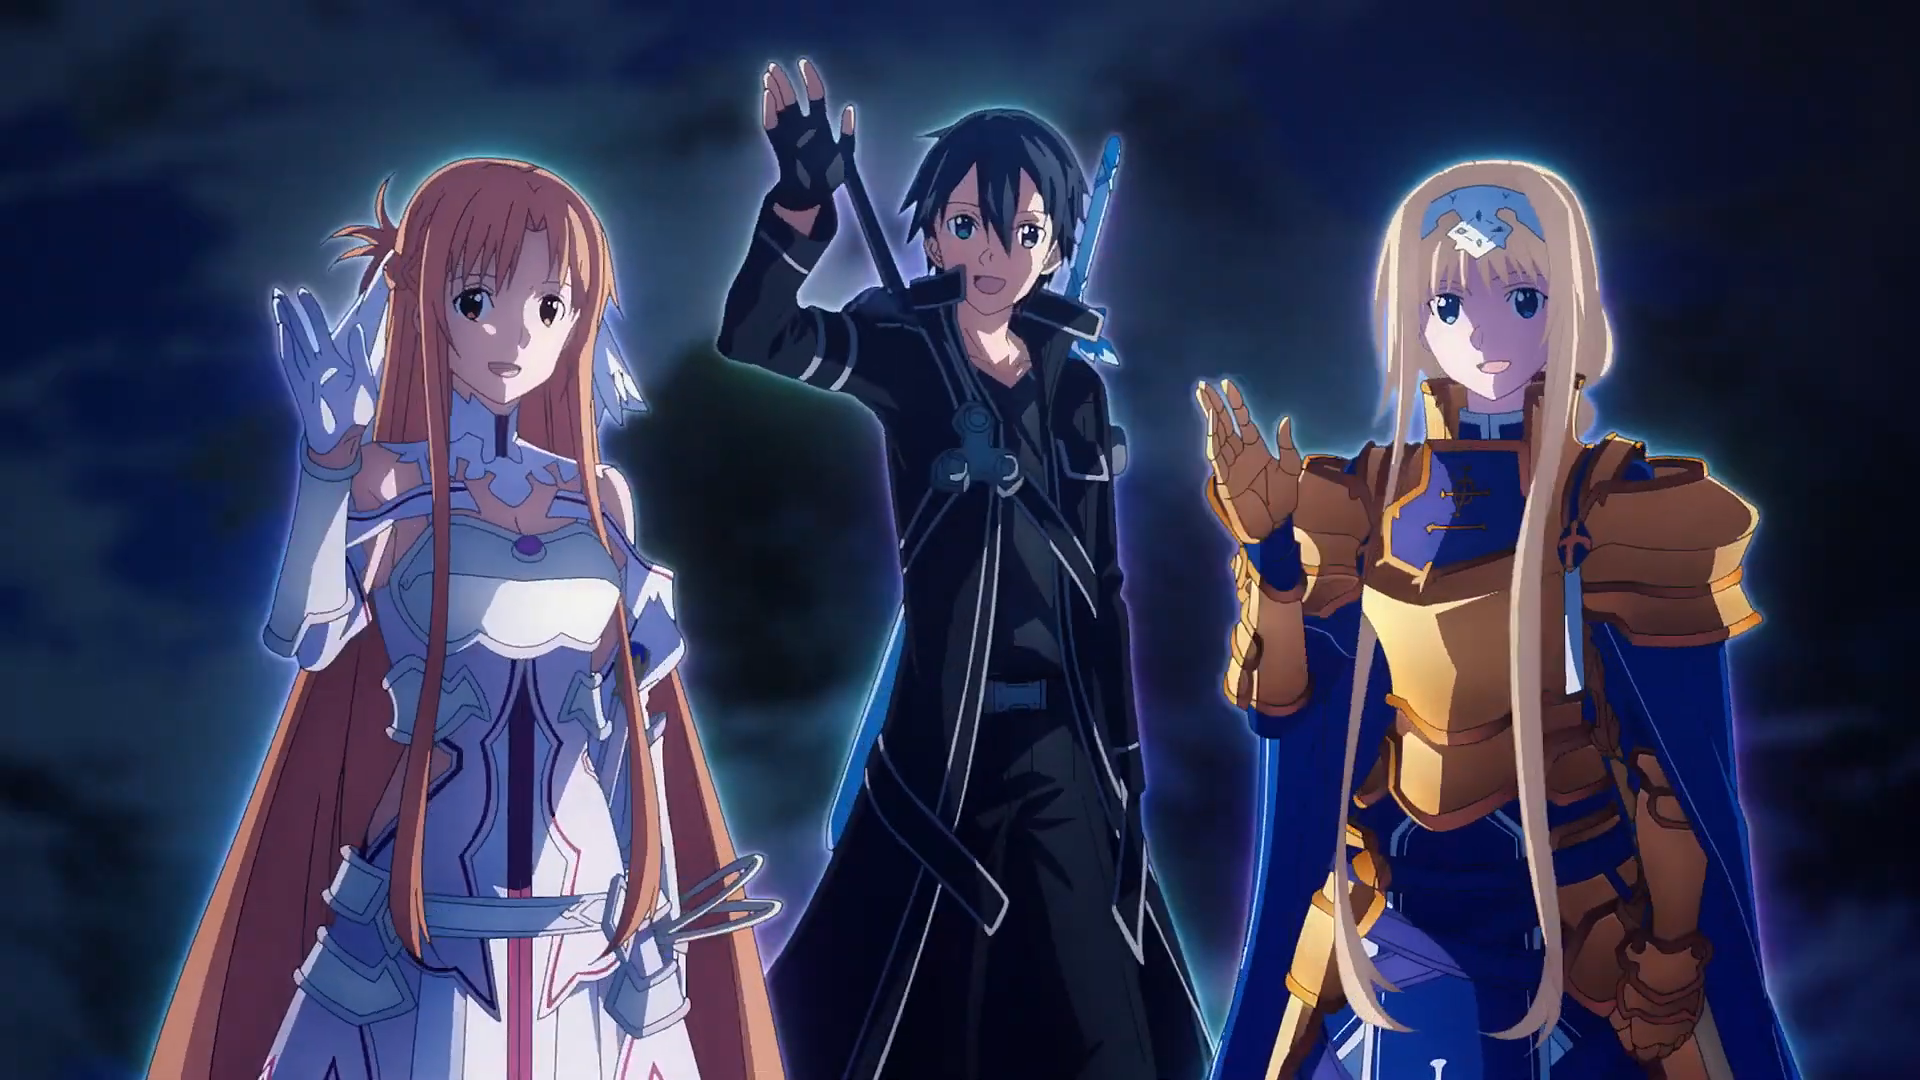 Catching Up With Sword Art Online - Anime News Network